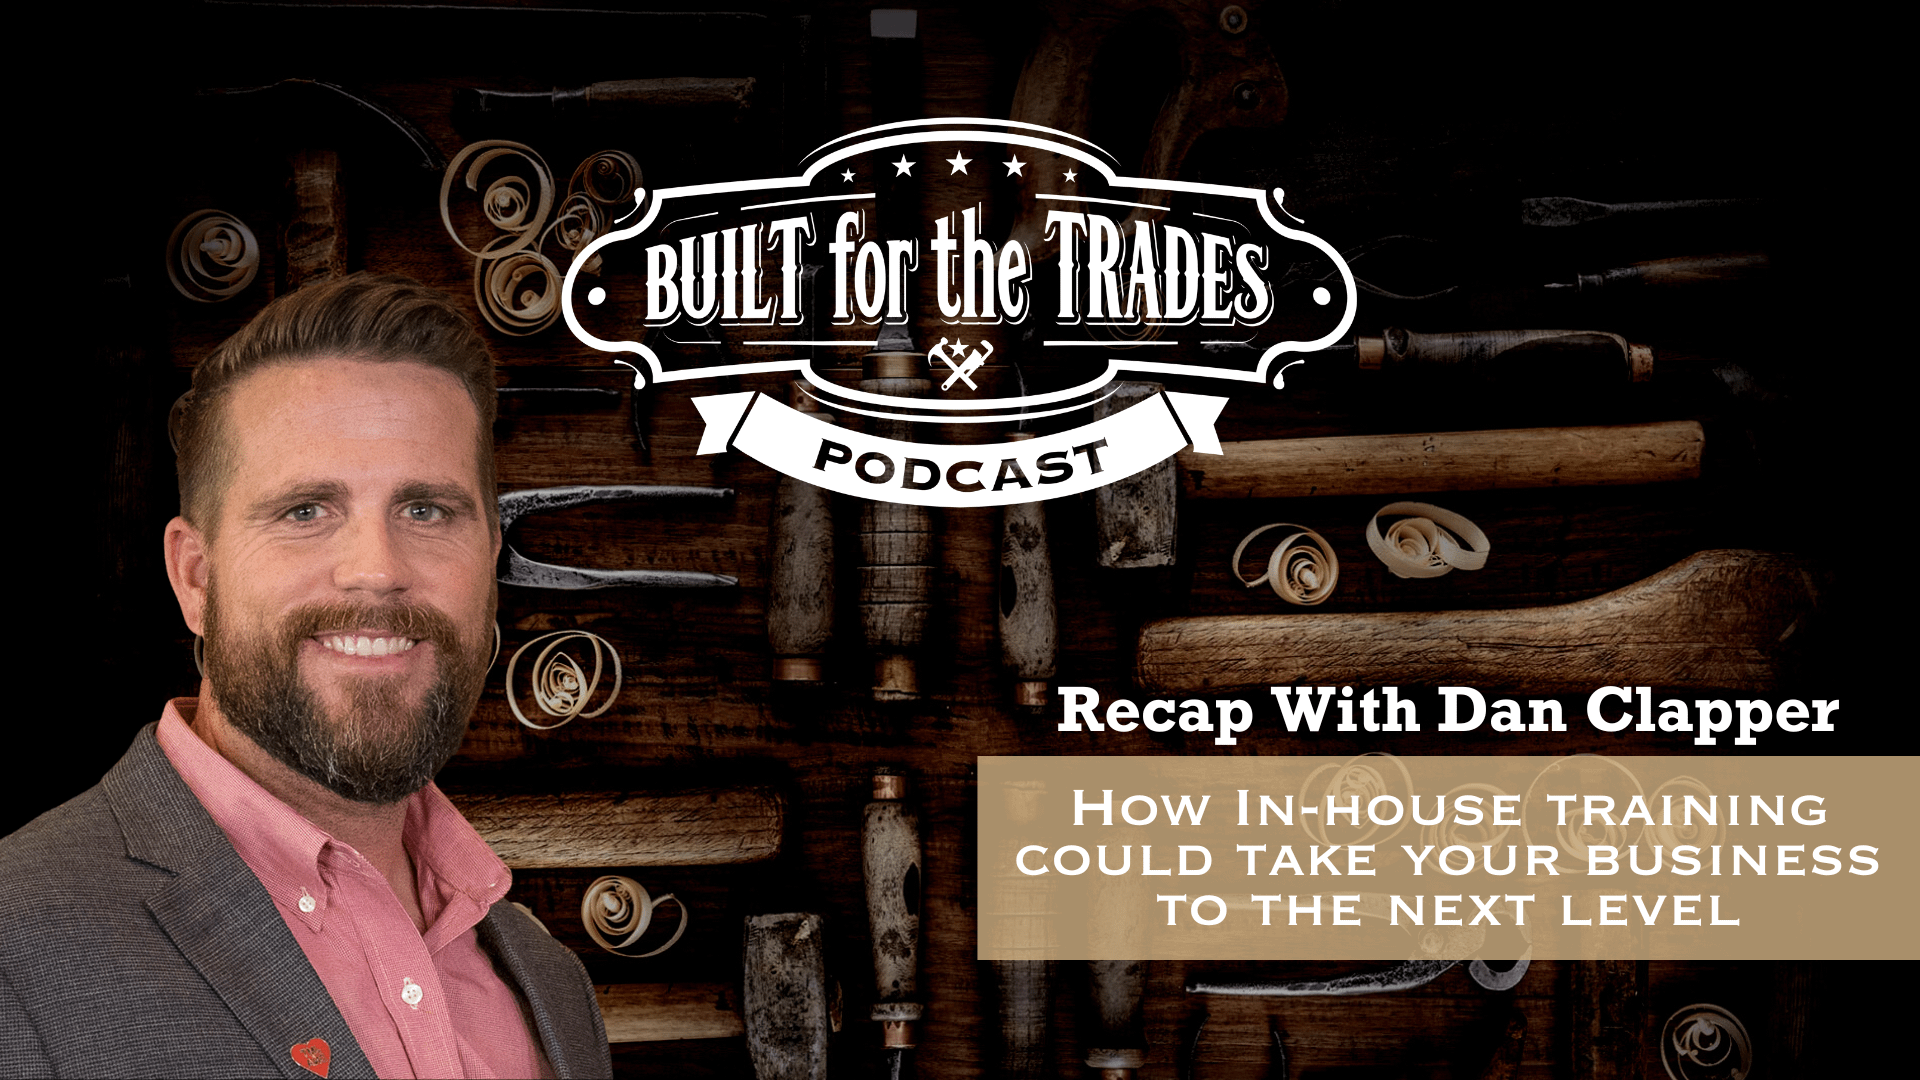 Recap with Dan Dowdy: How In-House Training Could Take Your Business To The Next Level